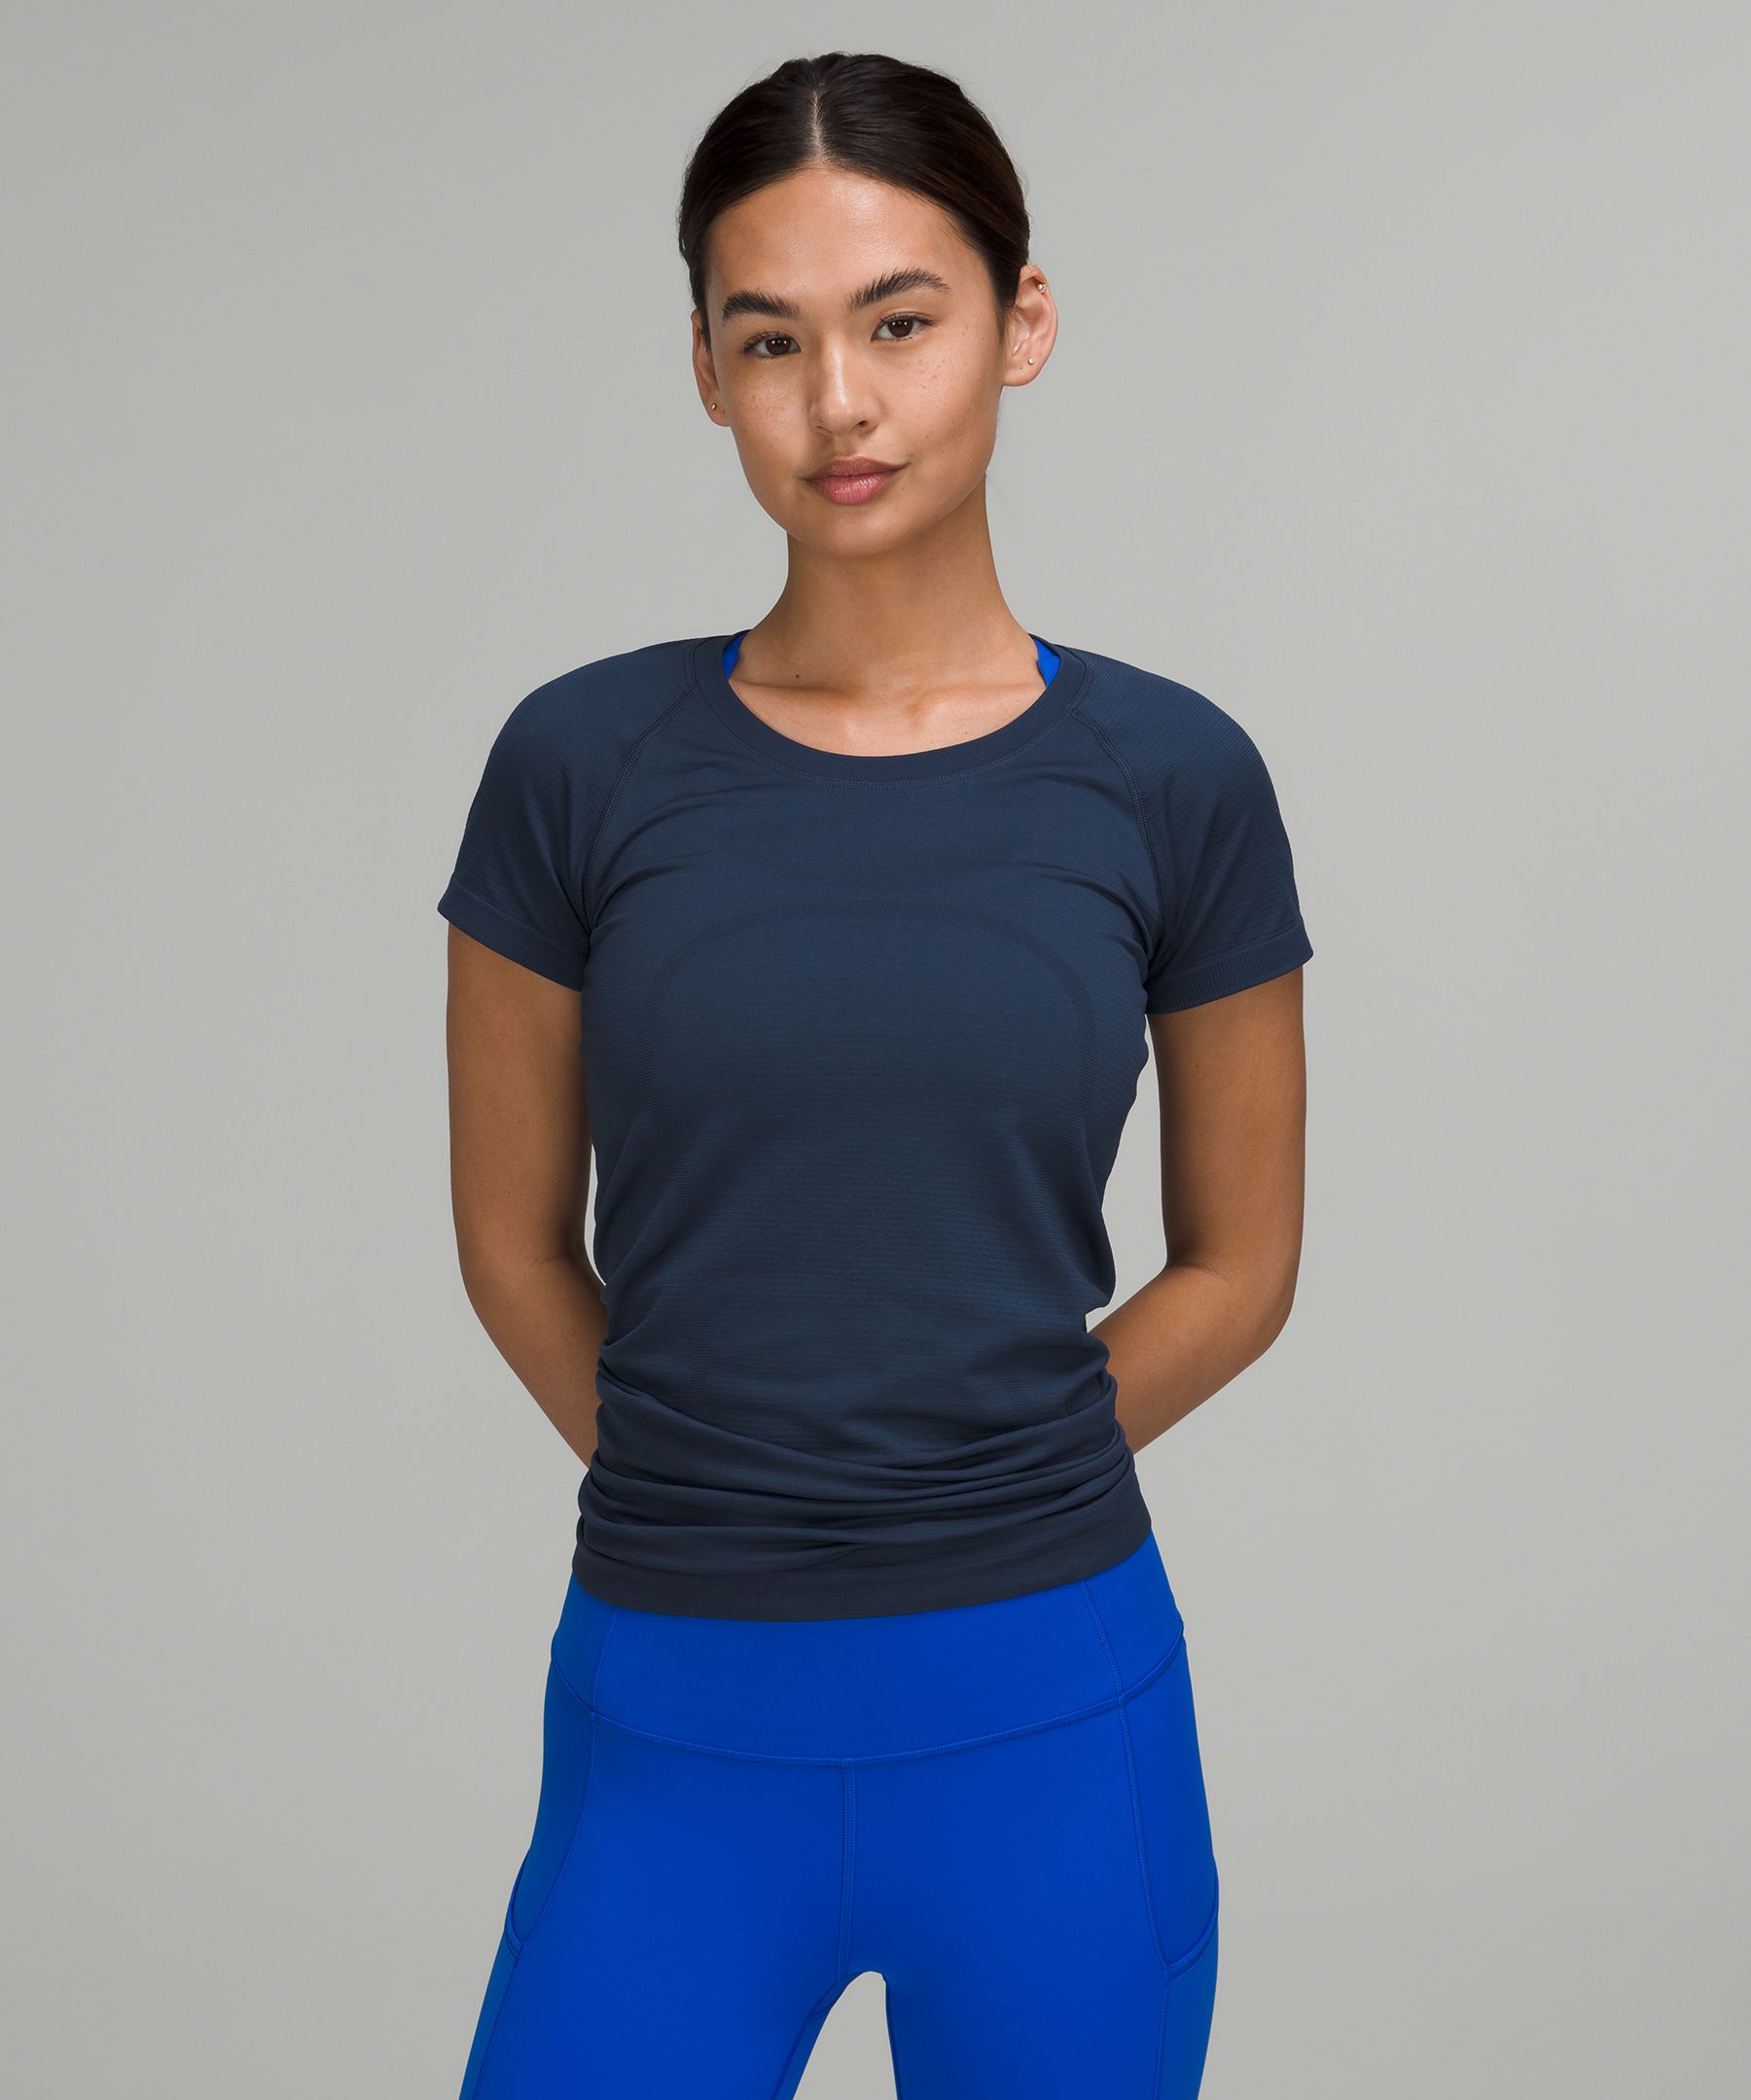 Lululemon Swiftly Tech Short Sleeve Shirt 2.0 In Mineral Blue/mineral Blue